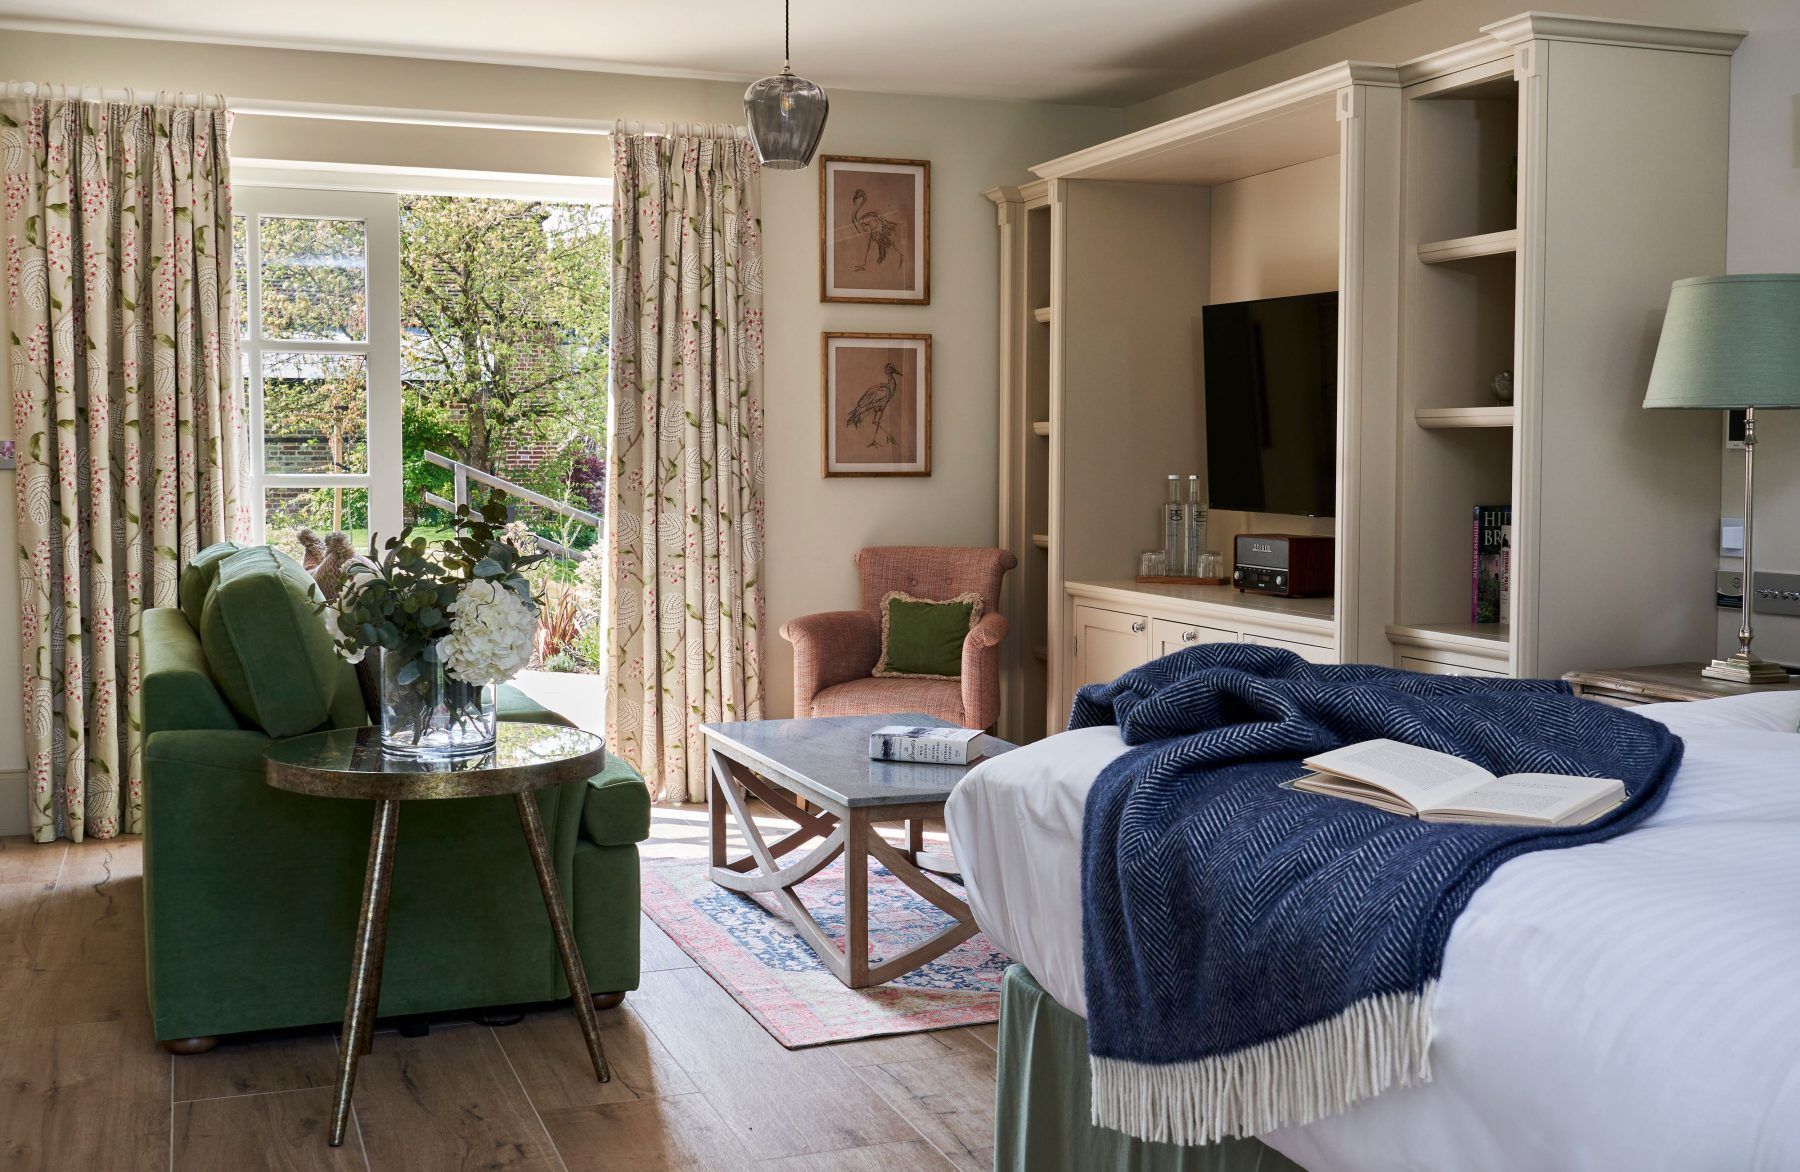 The Montagu Arms courtyard bedroom